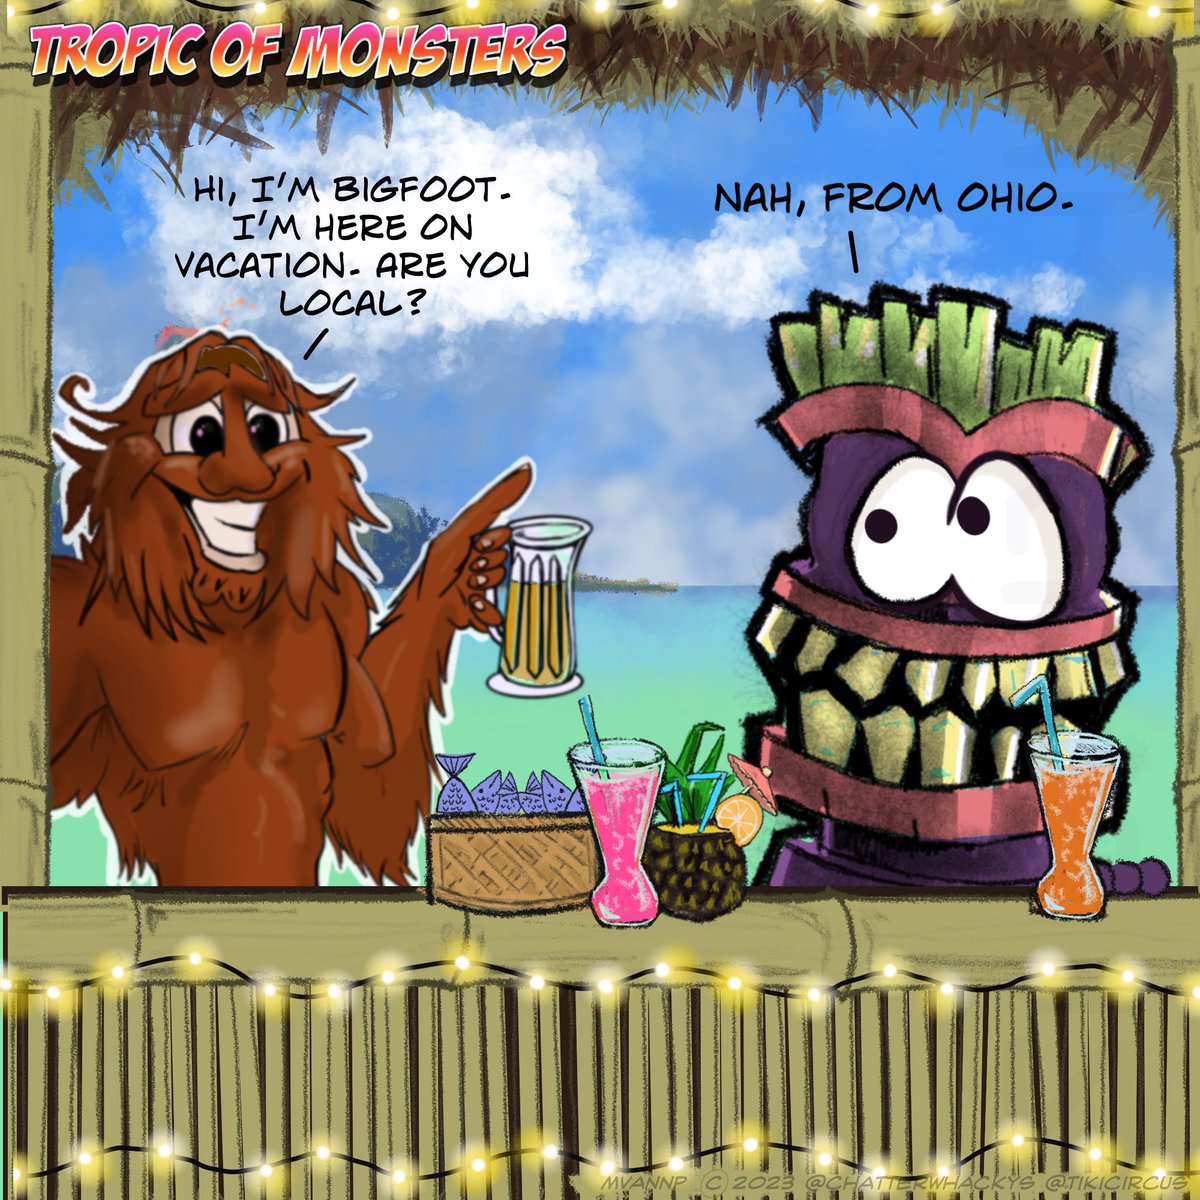 Tropic of Monsters - cartoon - Hang loose my friends 
Hi, I’m Bigfoot, I’m here on vacation. Are you local? Tiki: Nah, from Ohio.

#humorforhappiness 

#tiki #tikifun #comics #bigfoot #cartoon 
#bigfootsighting #doodle #tropicofmonsters #tikitoons #tikicartoon #tropicalfun